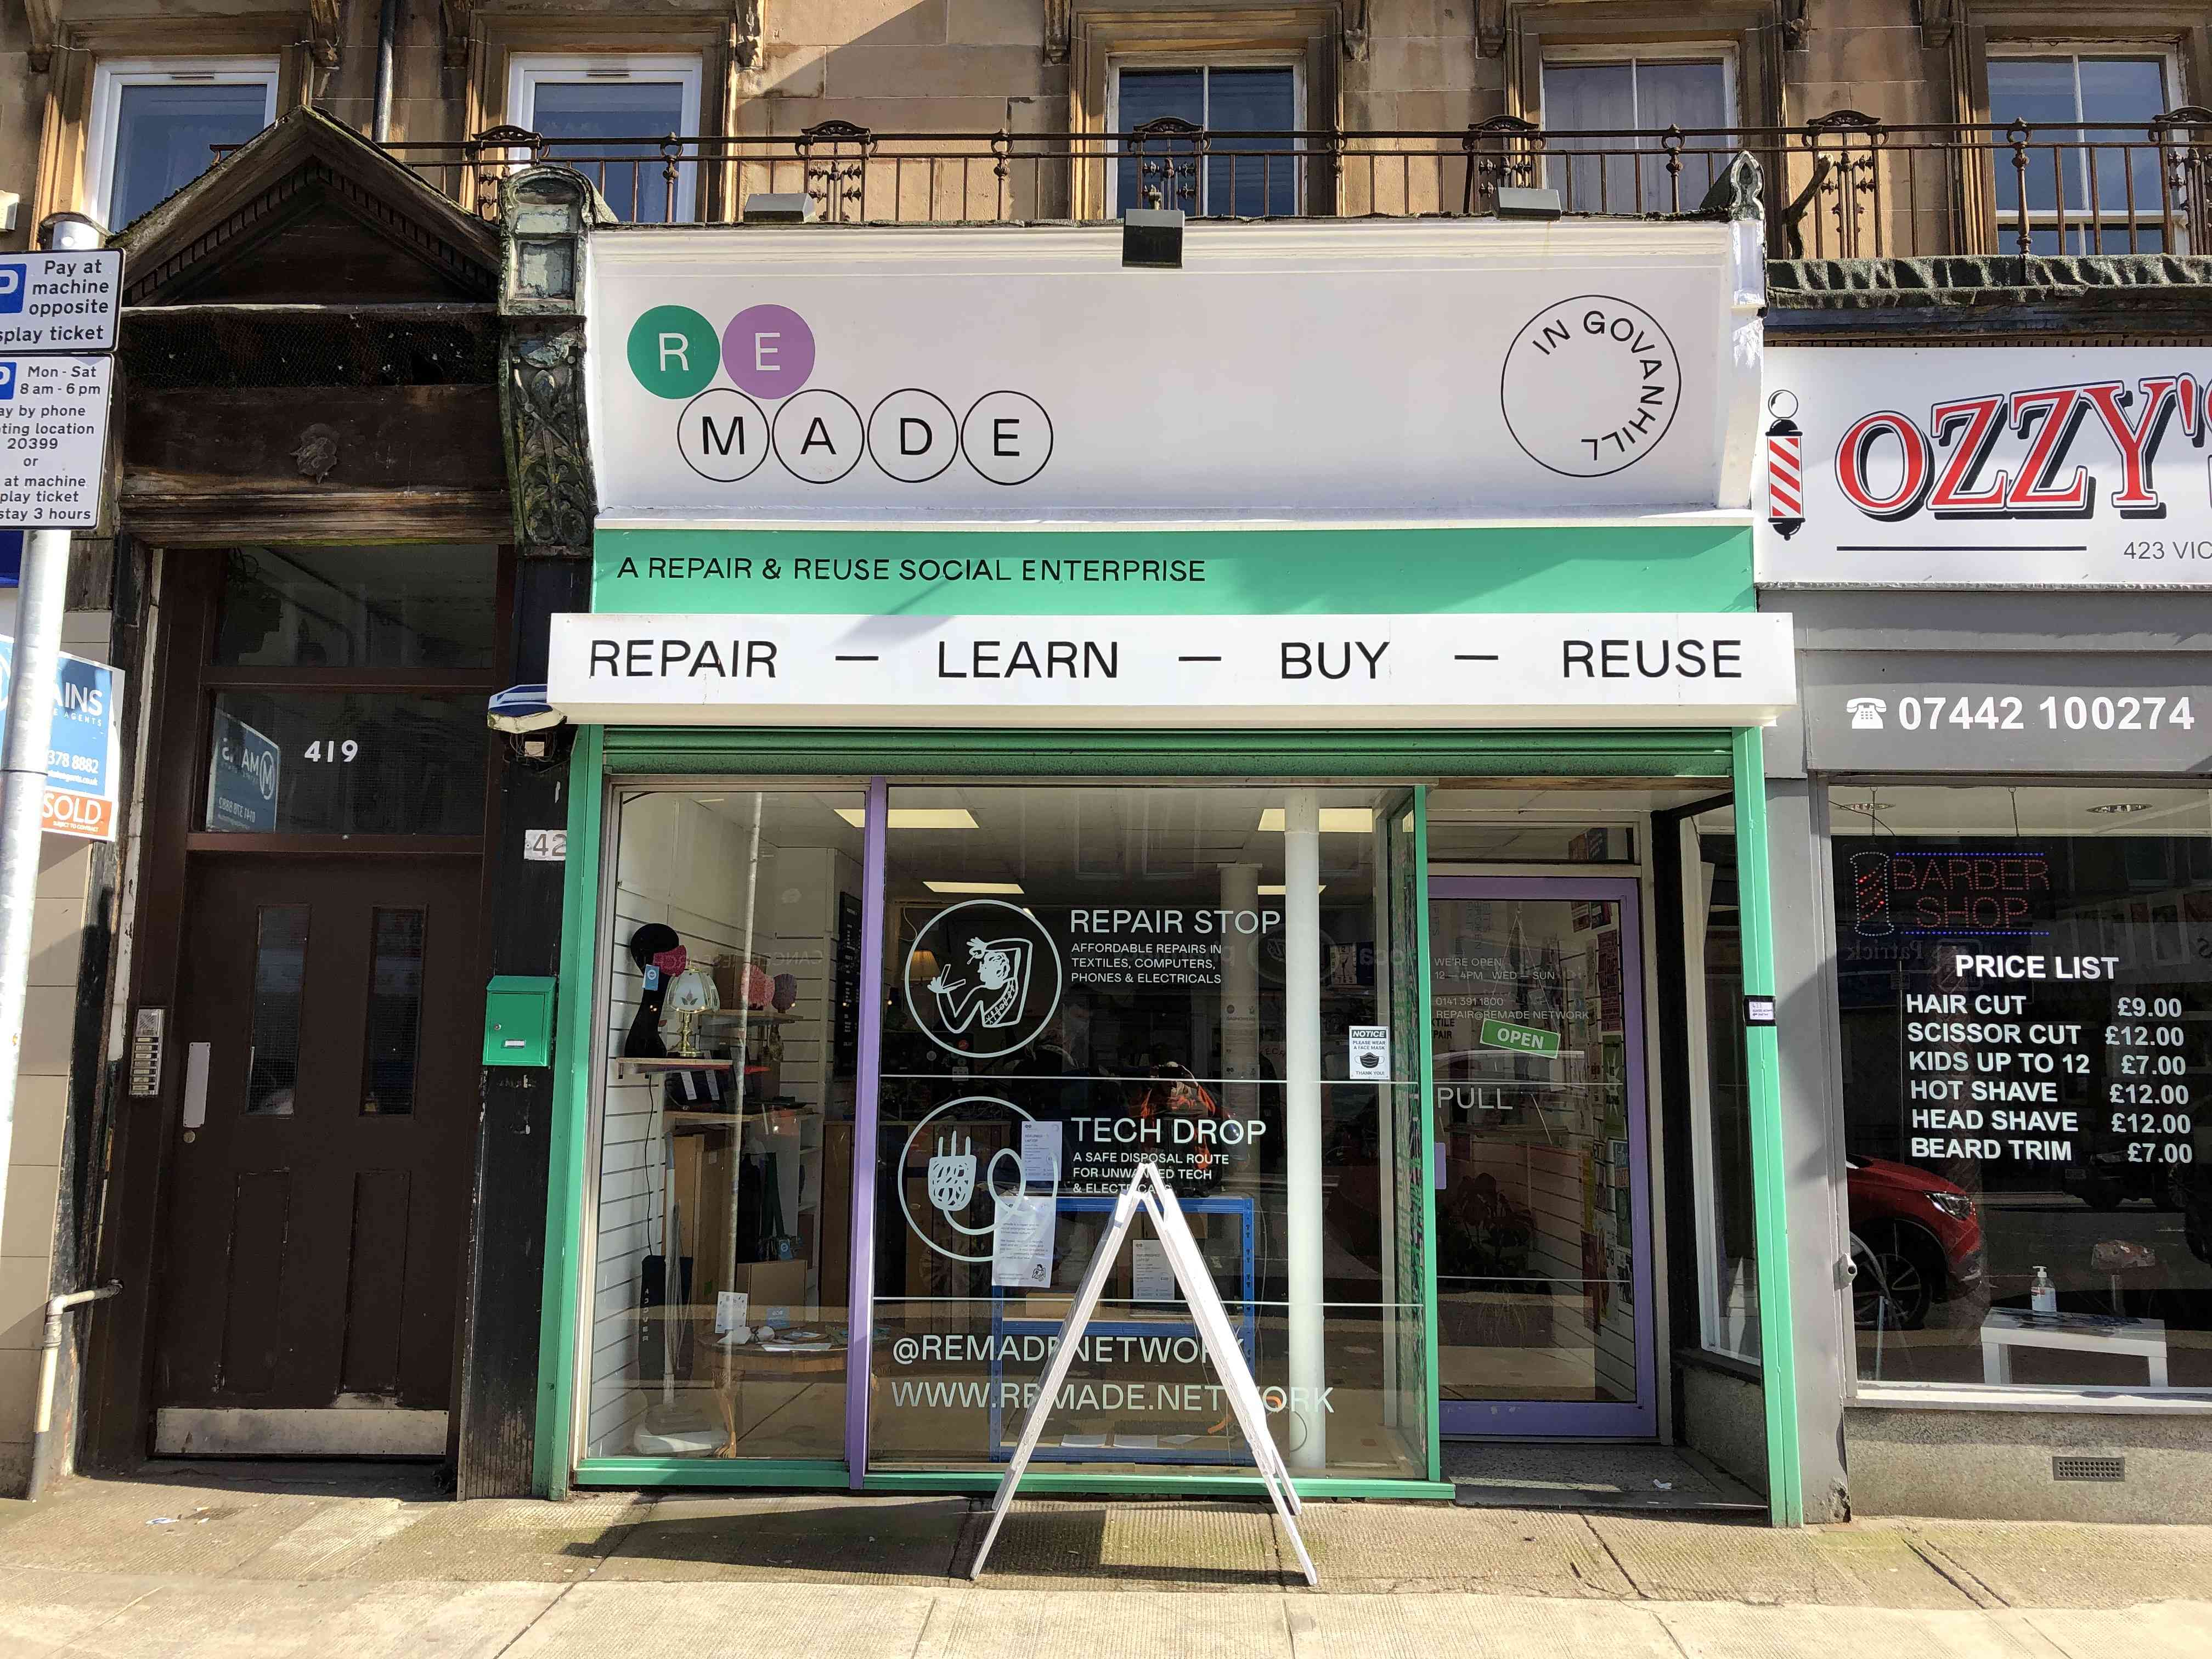 A street view of a green and white shop front with the following words: Remade in Govanhill; A repair and reuse social enterprise; repair, learn, buy, reuse; repair stop; tech drop. The shop is open.